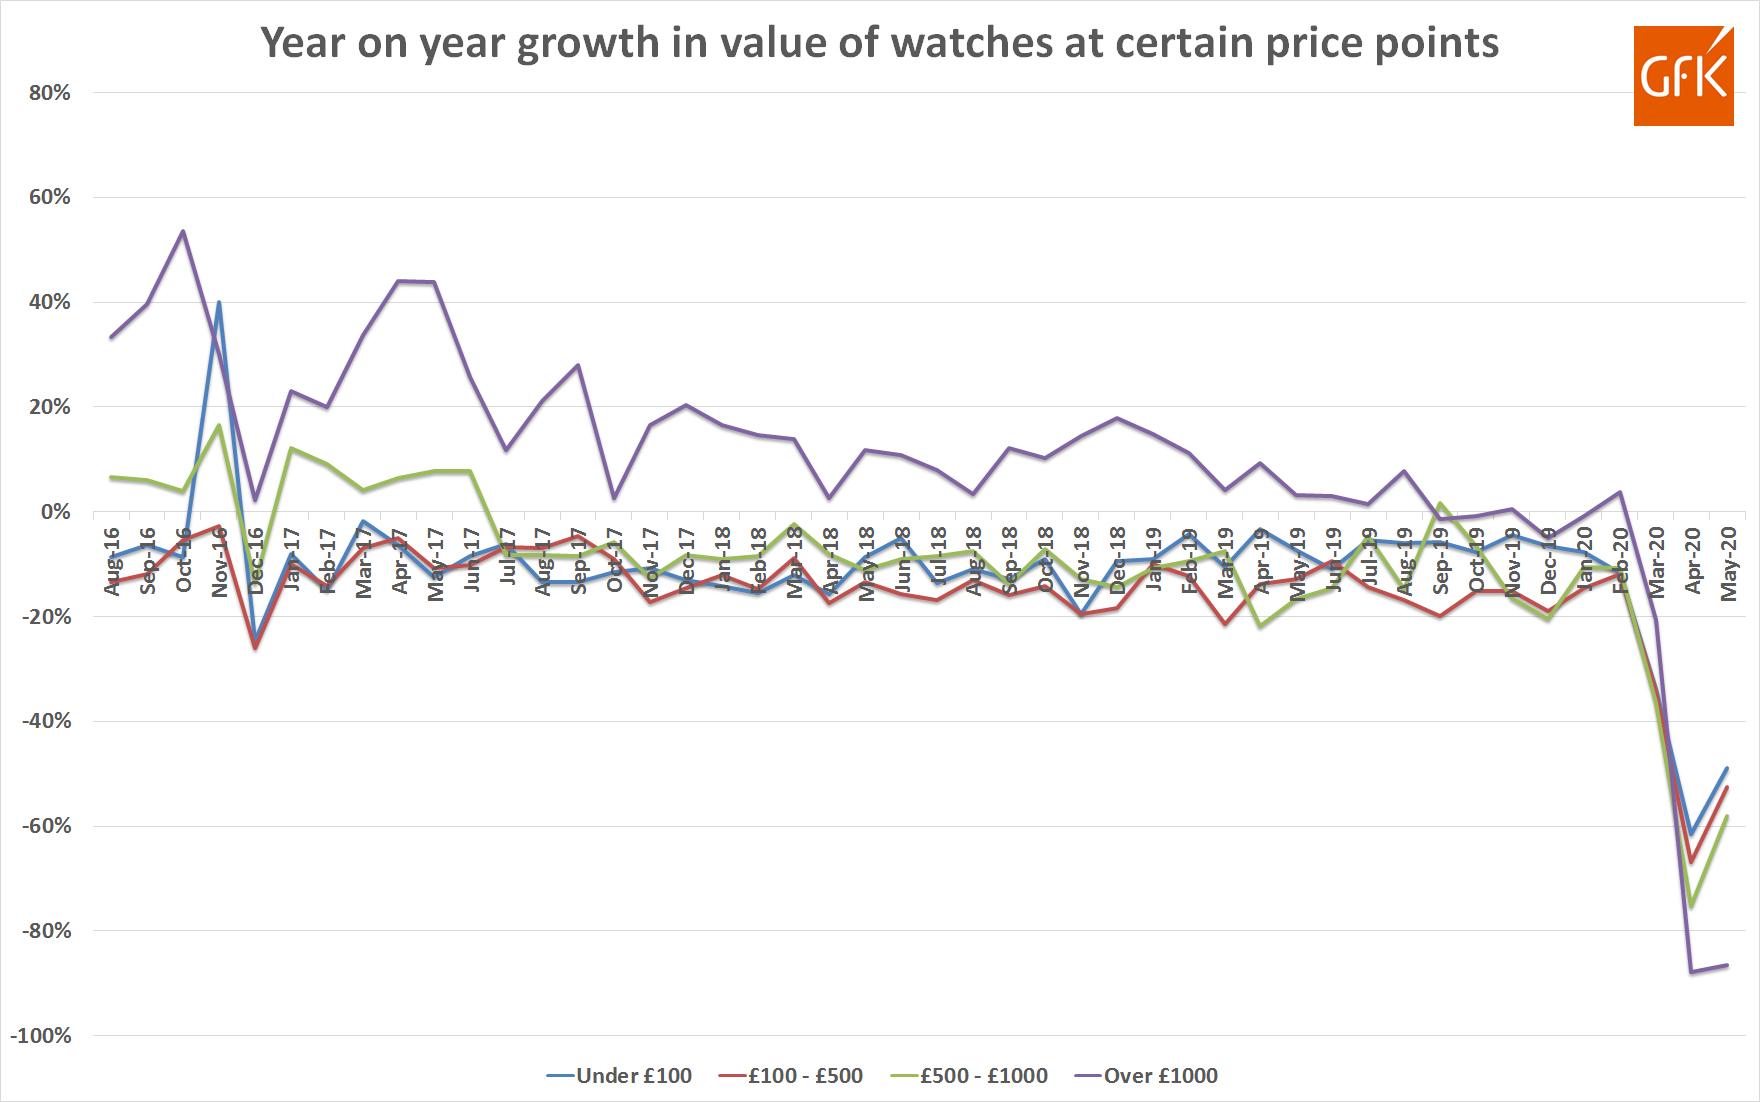 Gfk yoy growth in sales various price points